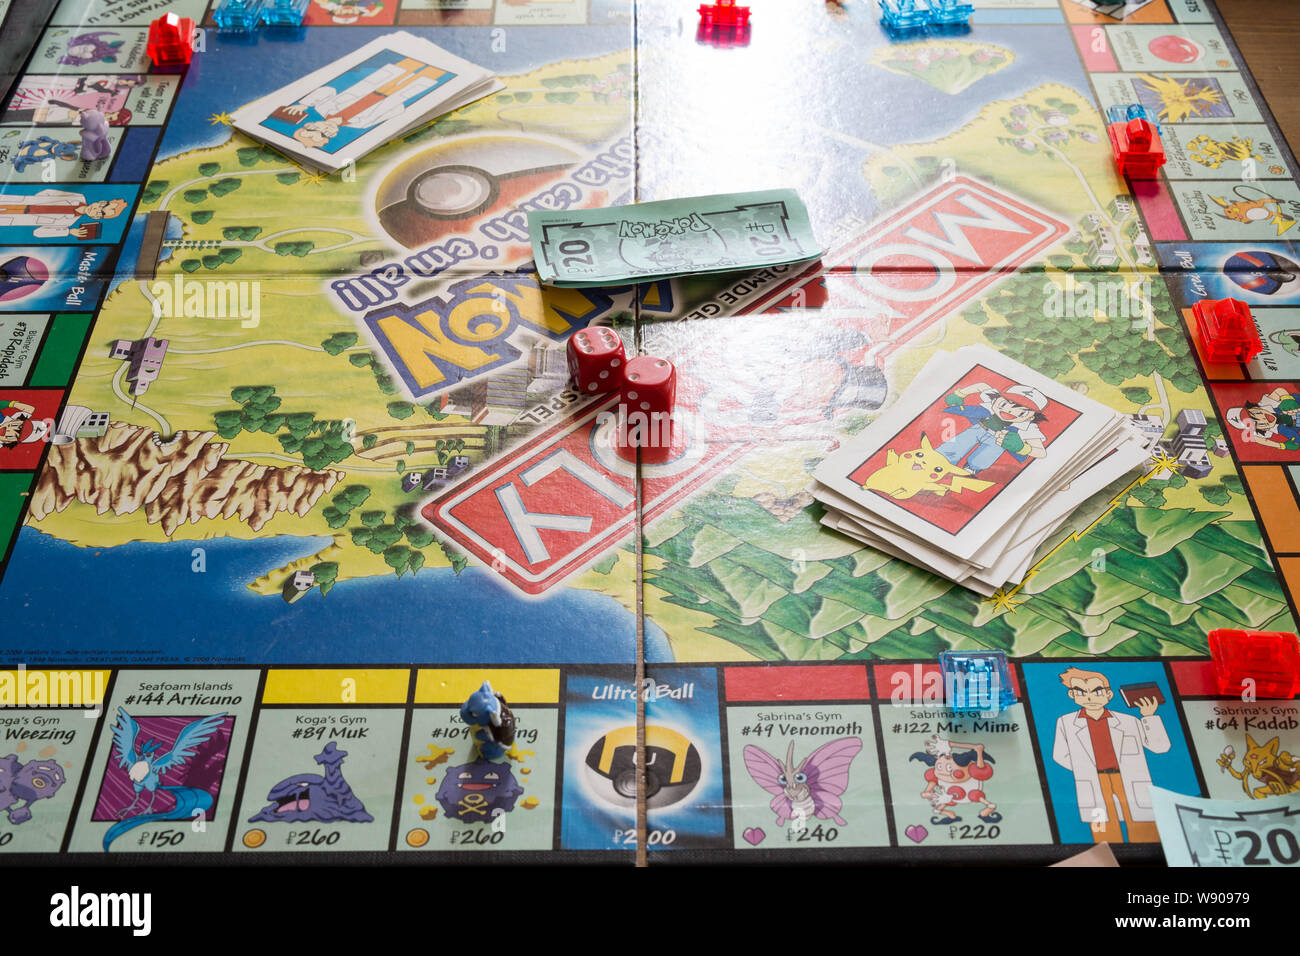 Monopoly Pokemon, 12 August The Netherlands board game Stock Photo